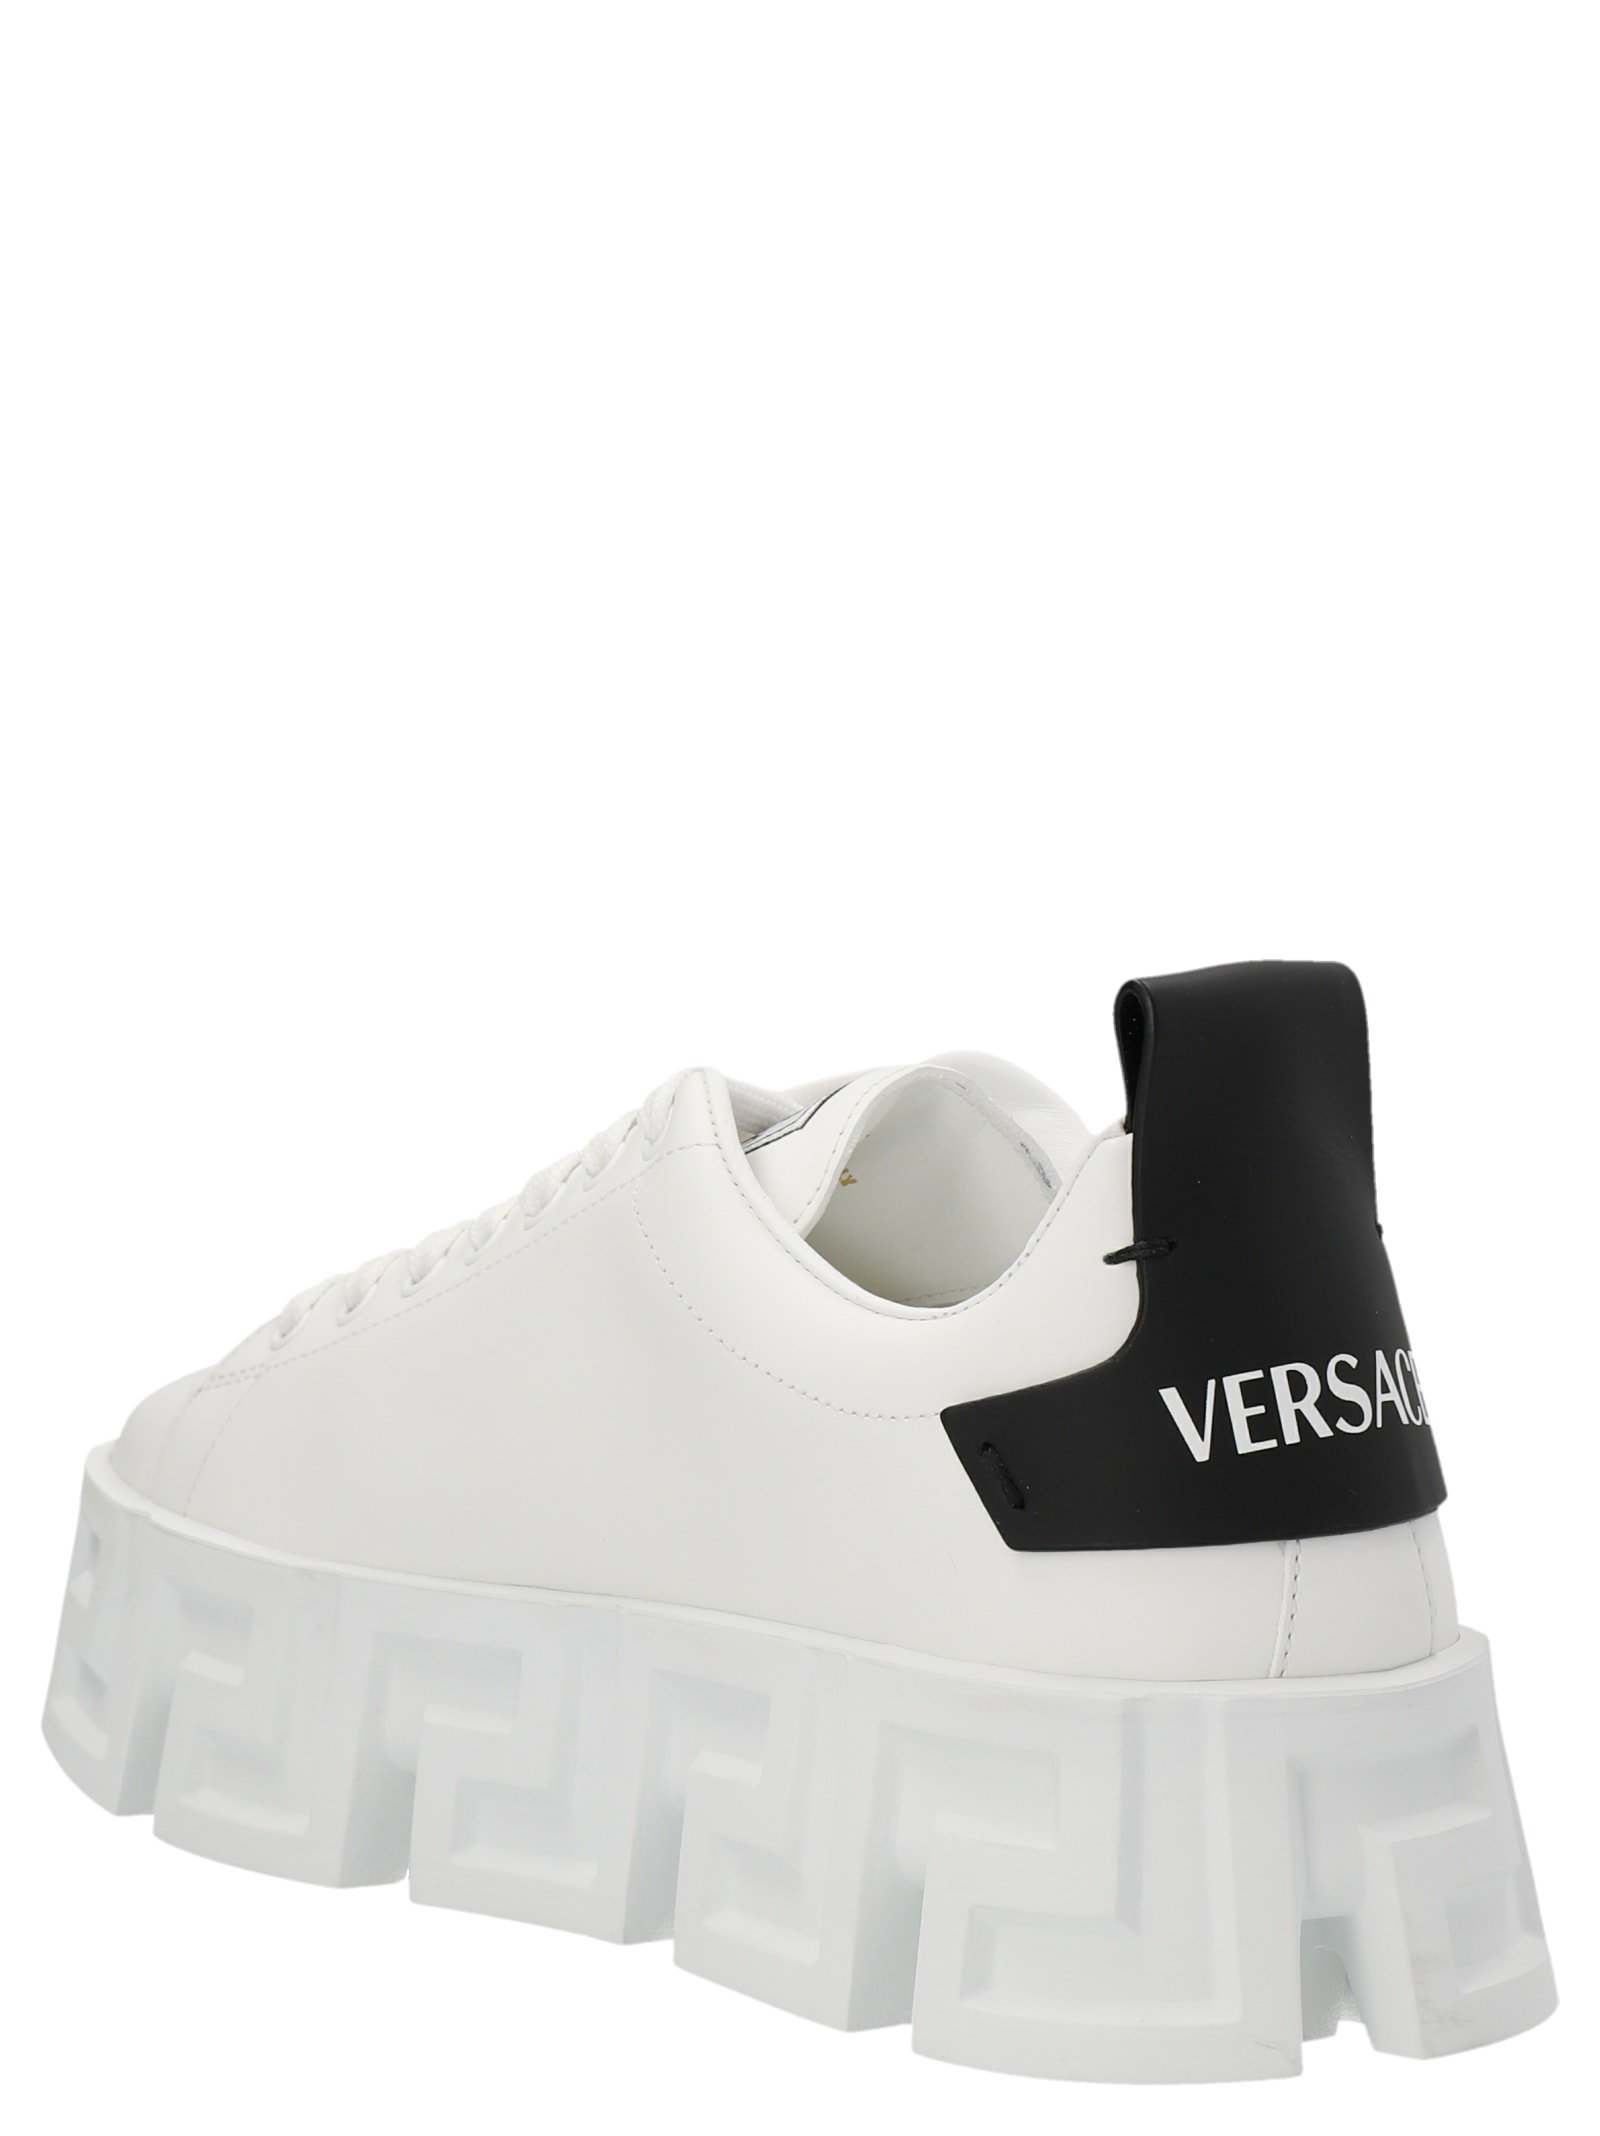 Versace Greca Labyrinth Sneakers In White/black | ModeSens